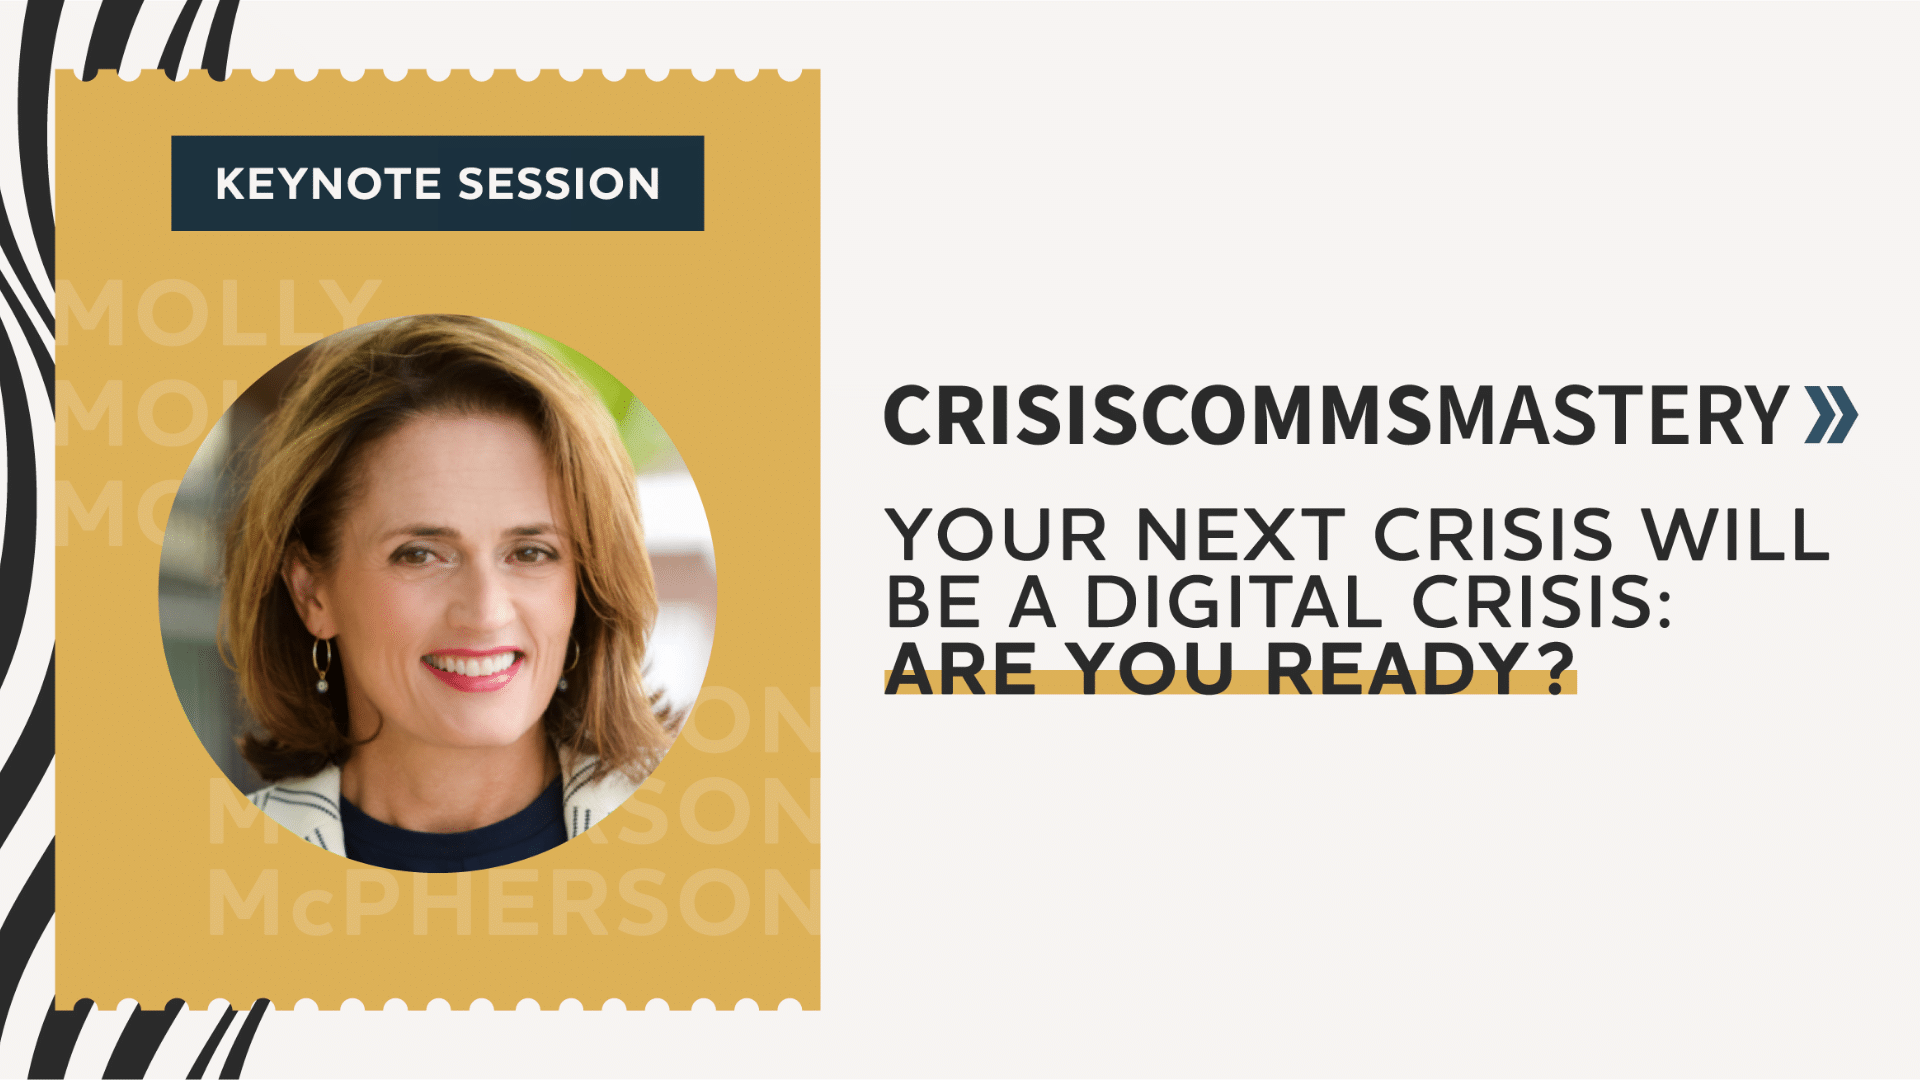 Molly McPherson Says Your Next Crisis Will Be Digital: Crisis Comms Mastery Keynote Session Recap